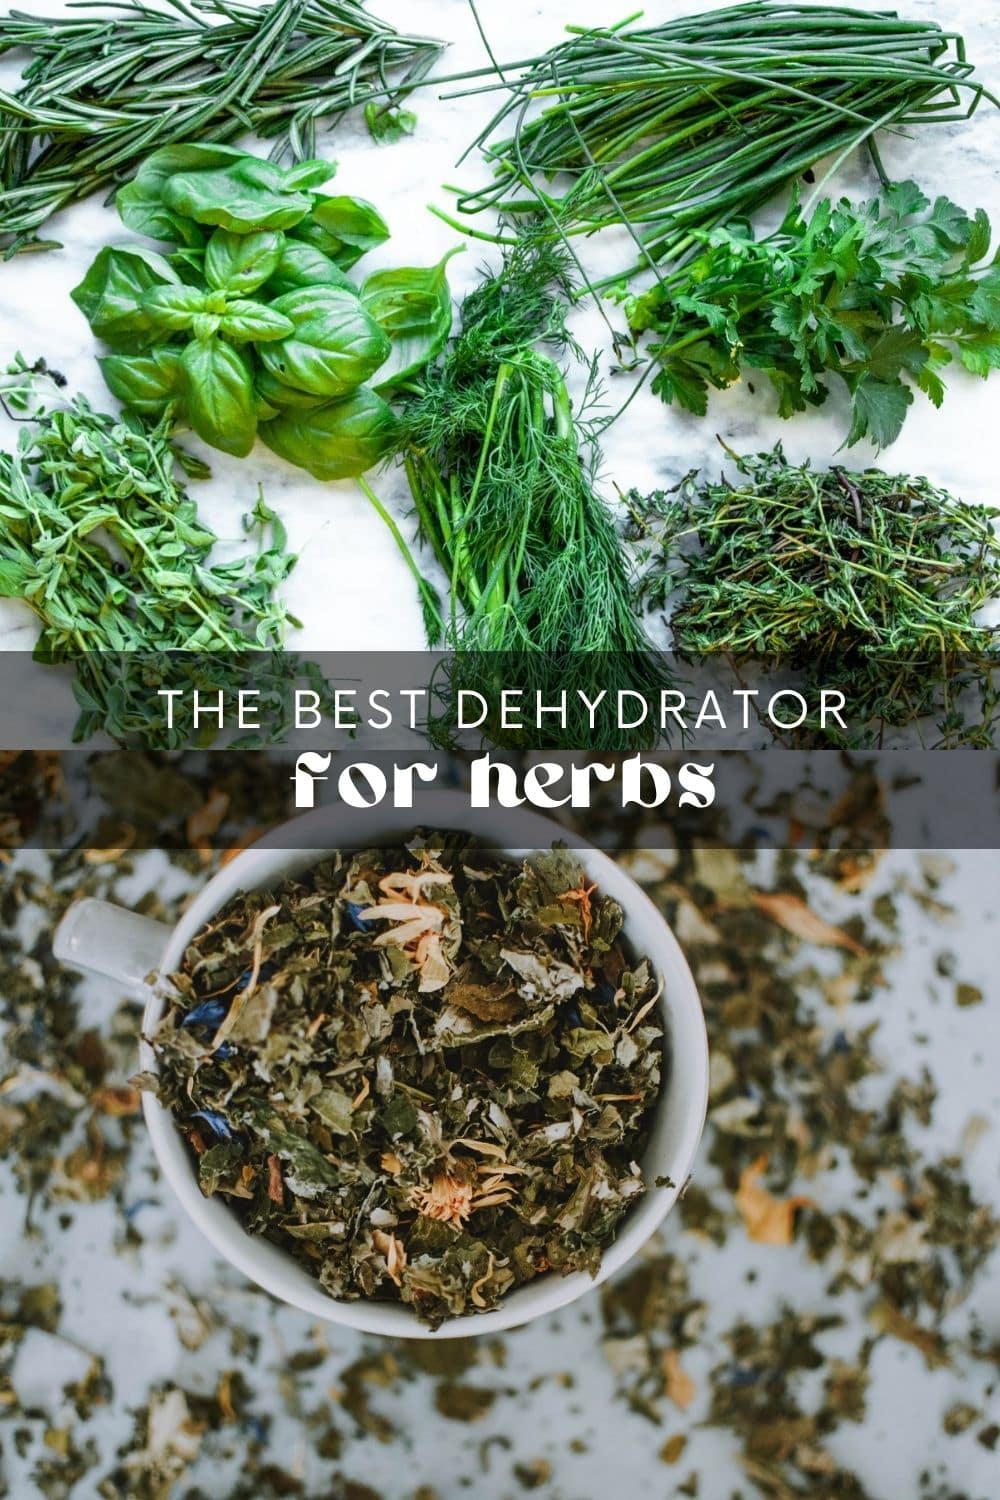 If you have a surplus of fresh herbs, dehydrating them is a great way to preserve their flavor and nutrients. Dried herbs can last for years, making them a cost-effective and convenient option for cooking! However, not all food dehydrators are suitable for drying herbs. Herbs are delicate and require gentle drying to retain their flavor, color, and aroma. 